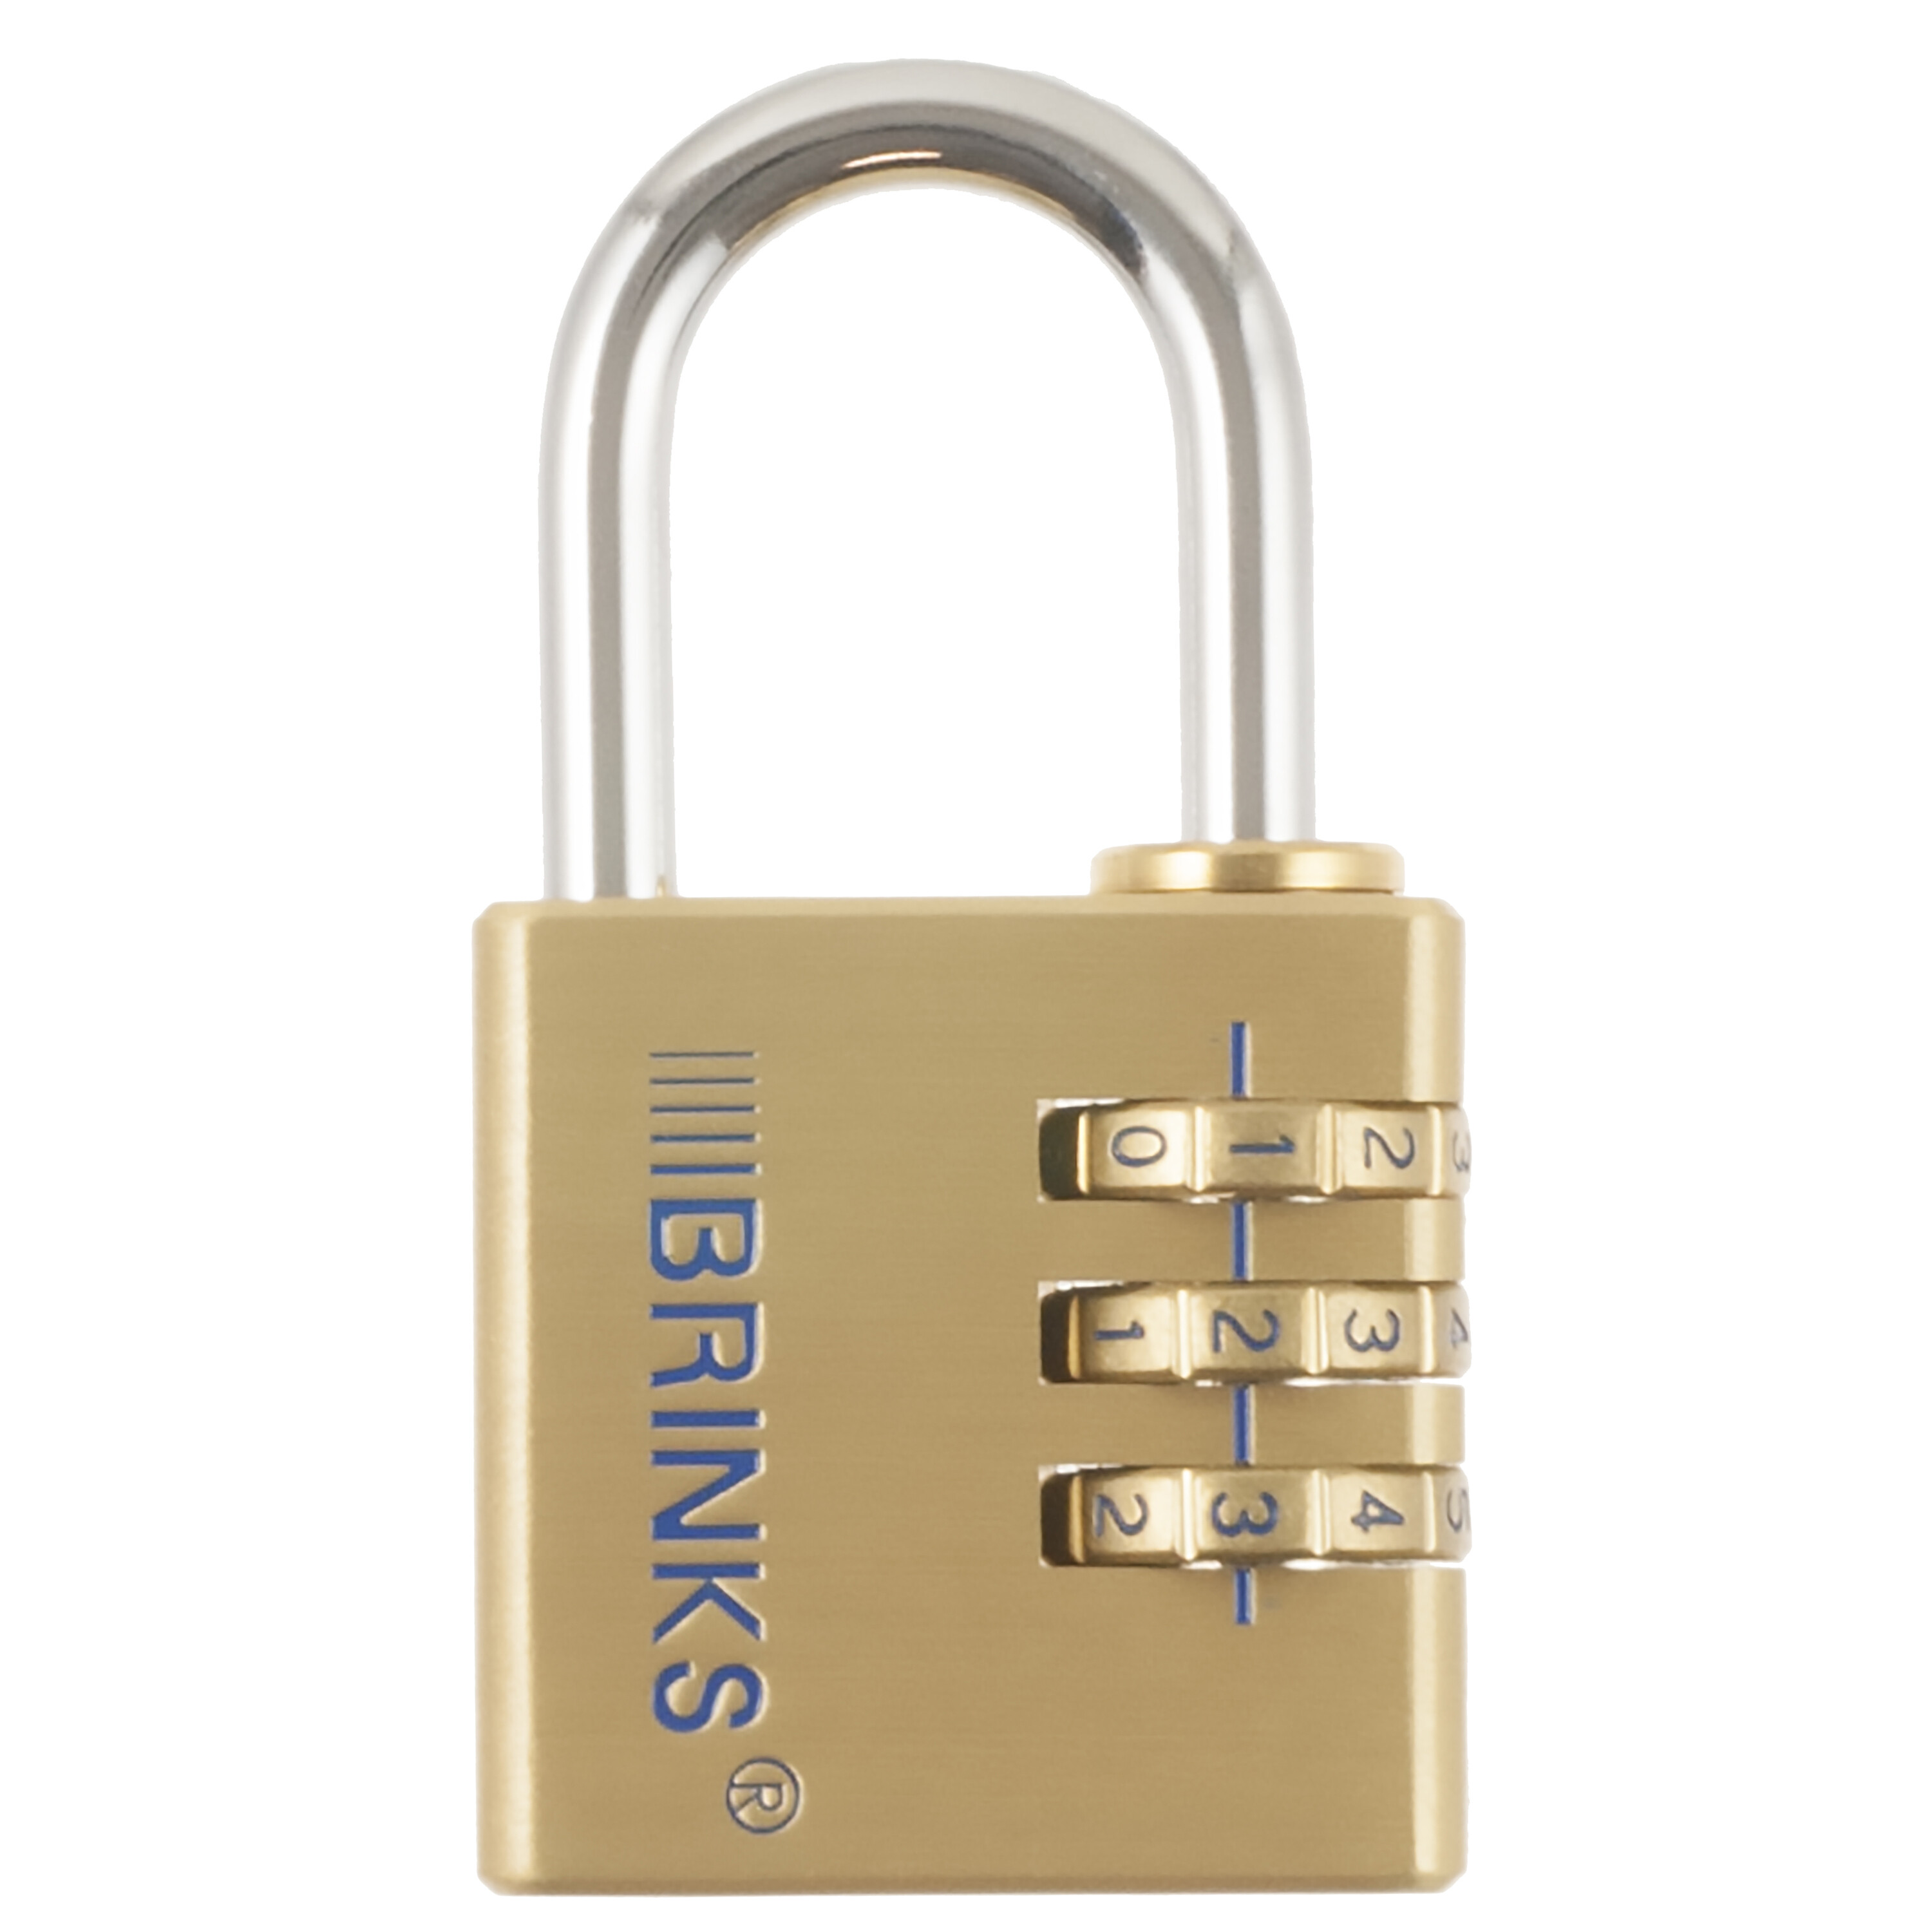 how to open a brinks 4 digit combination lock without the combination